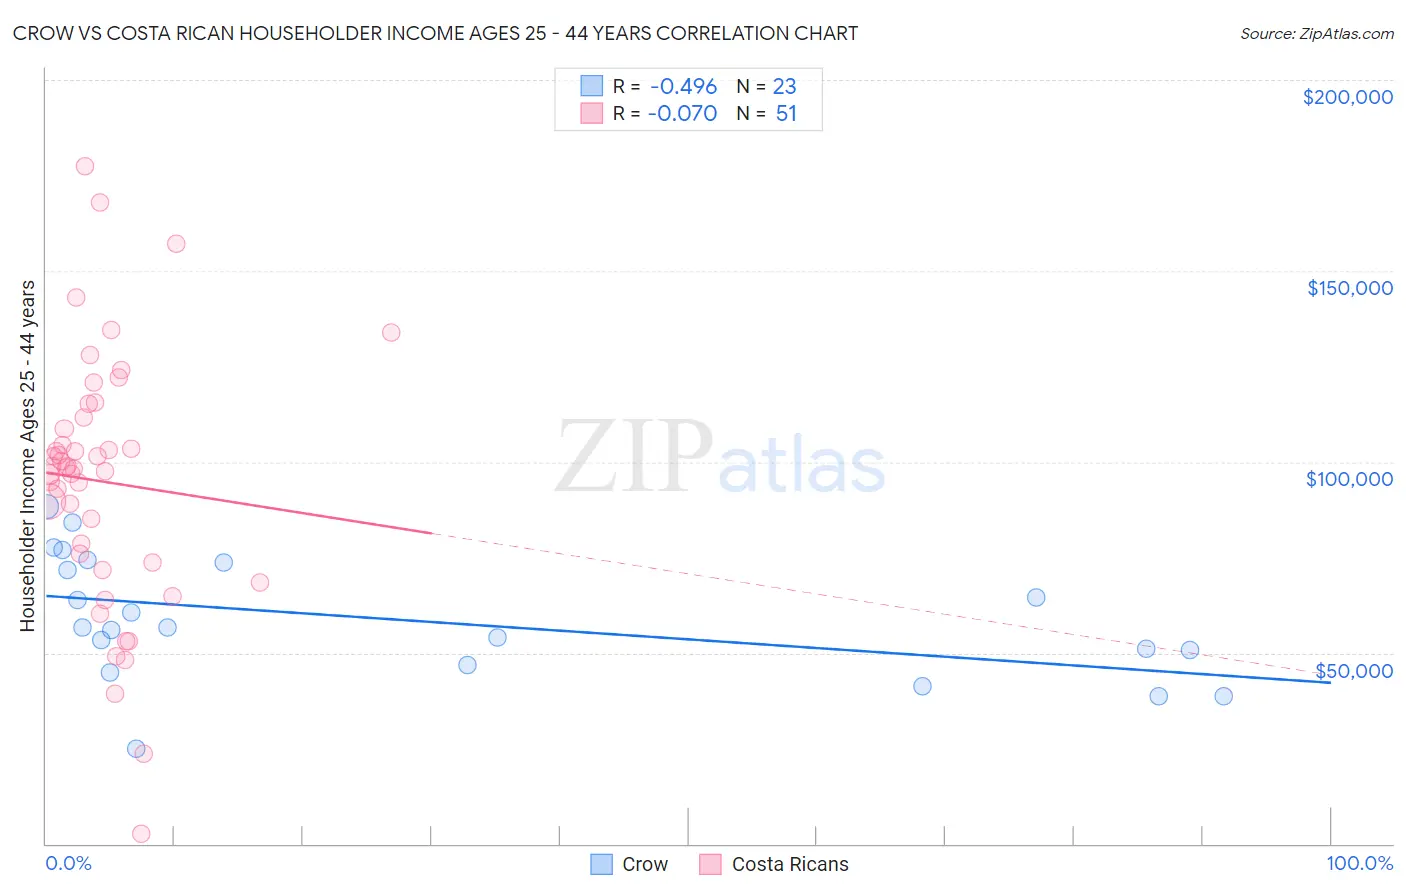 Crow vs Costa Rican Householder Income Ages 25 - 44 years